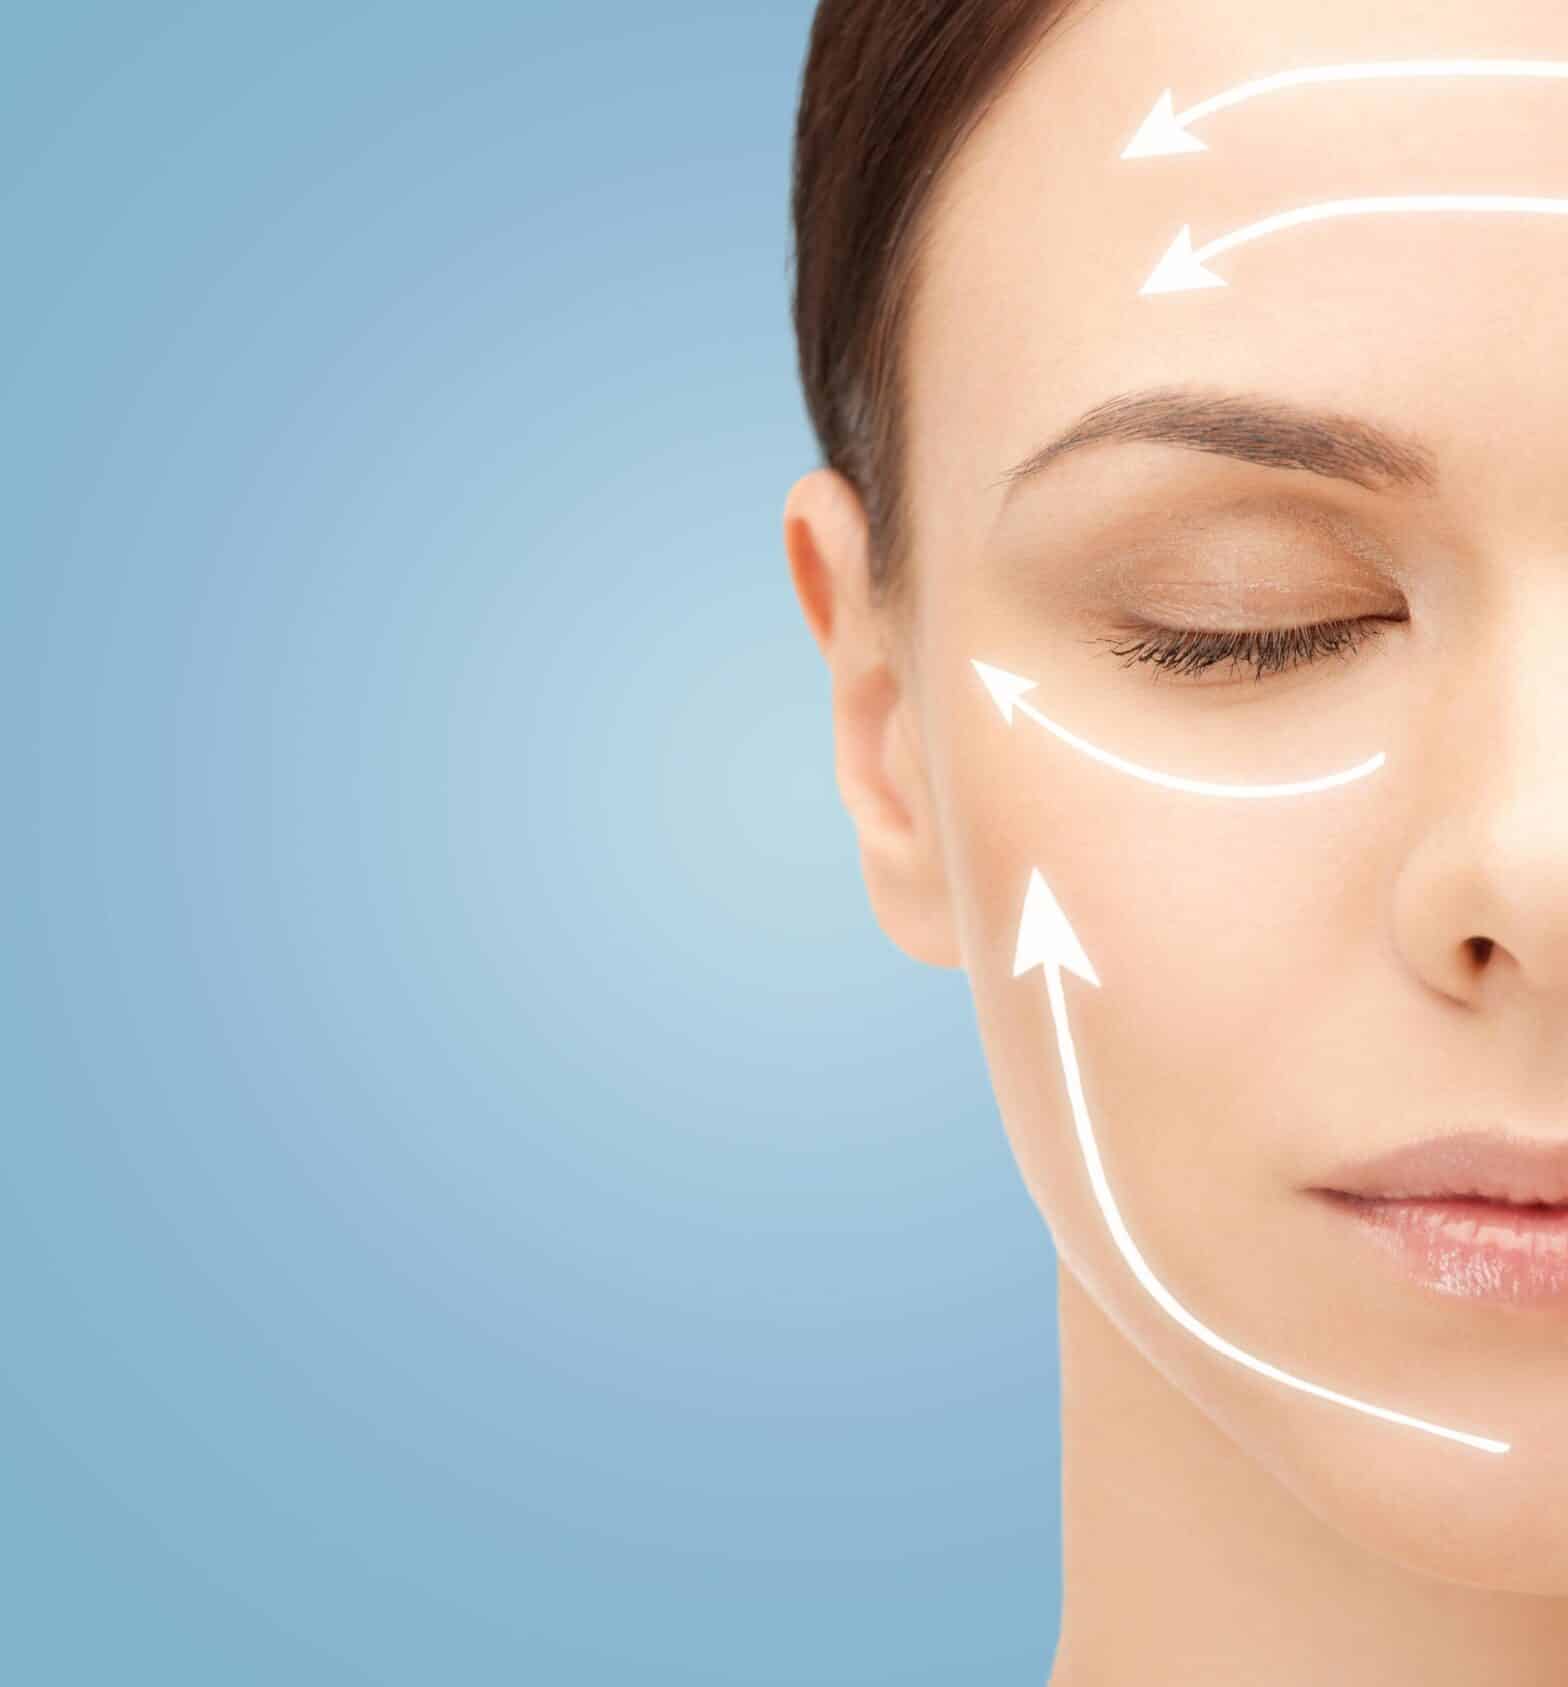 How To Sleep Comfortably After a Facelift Surgery